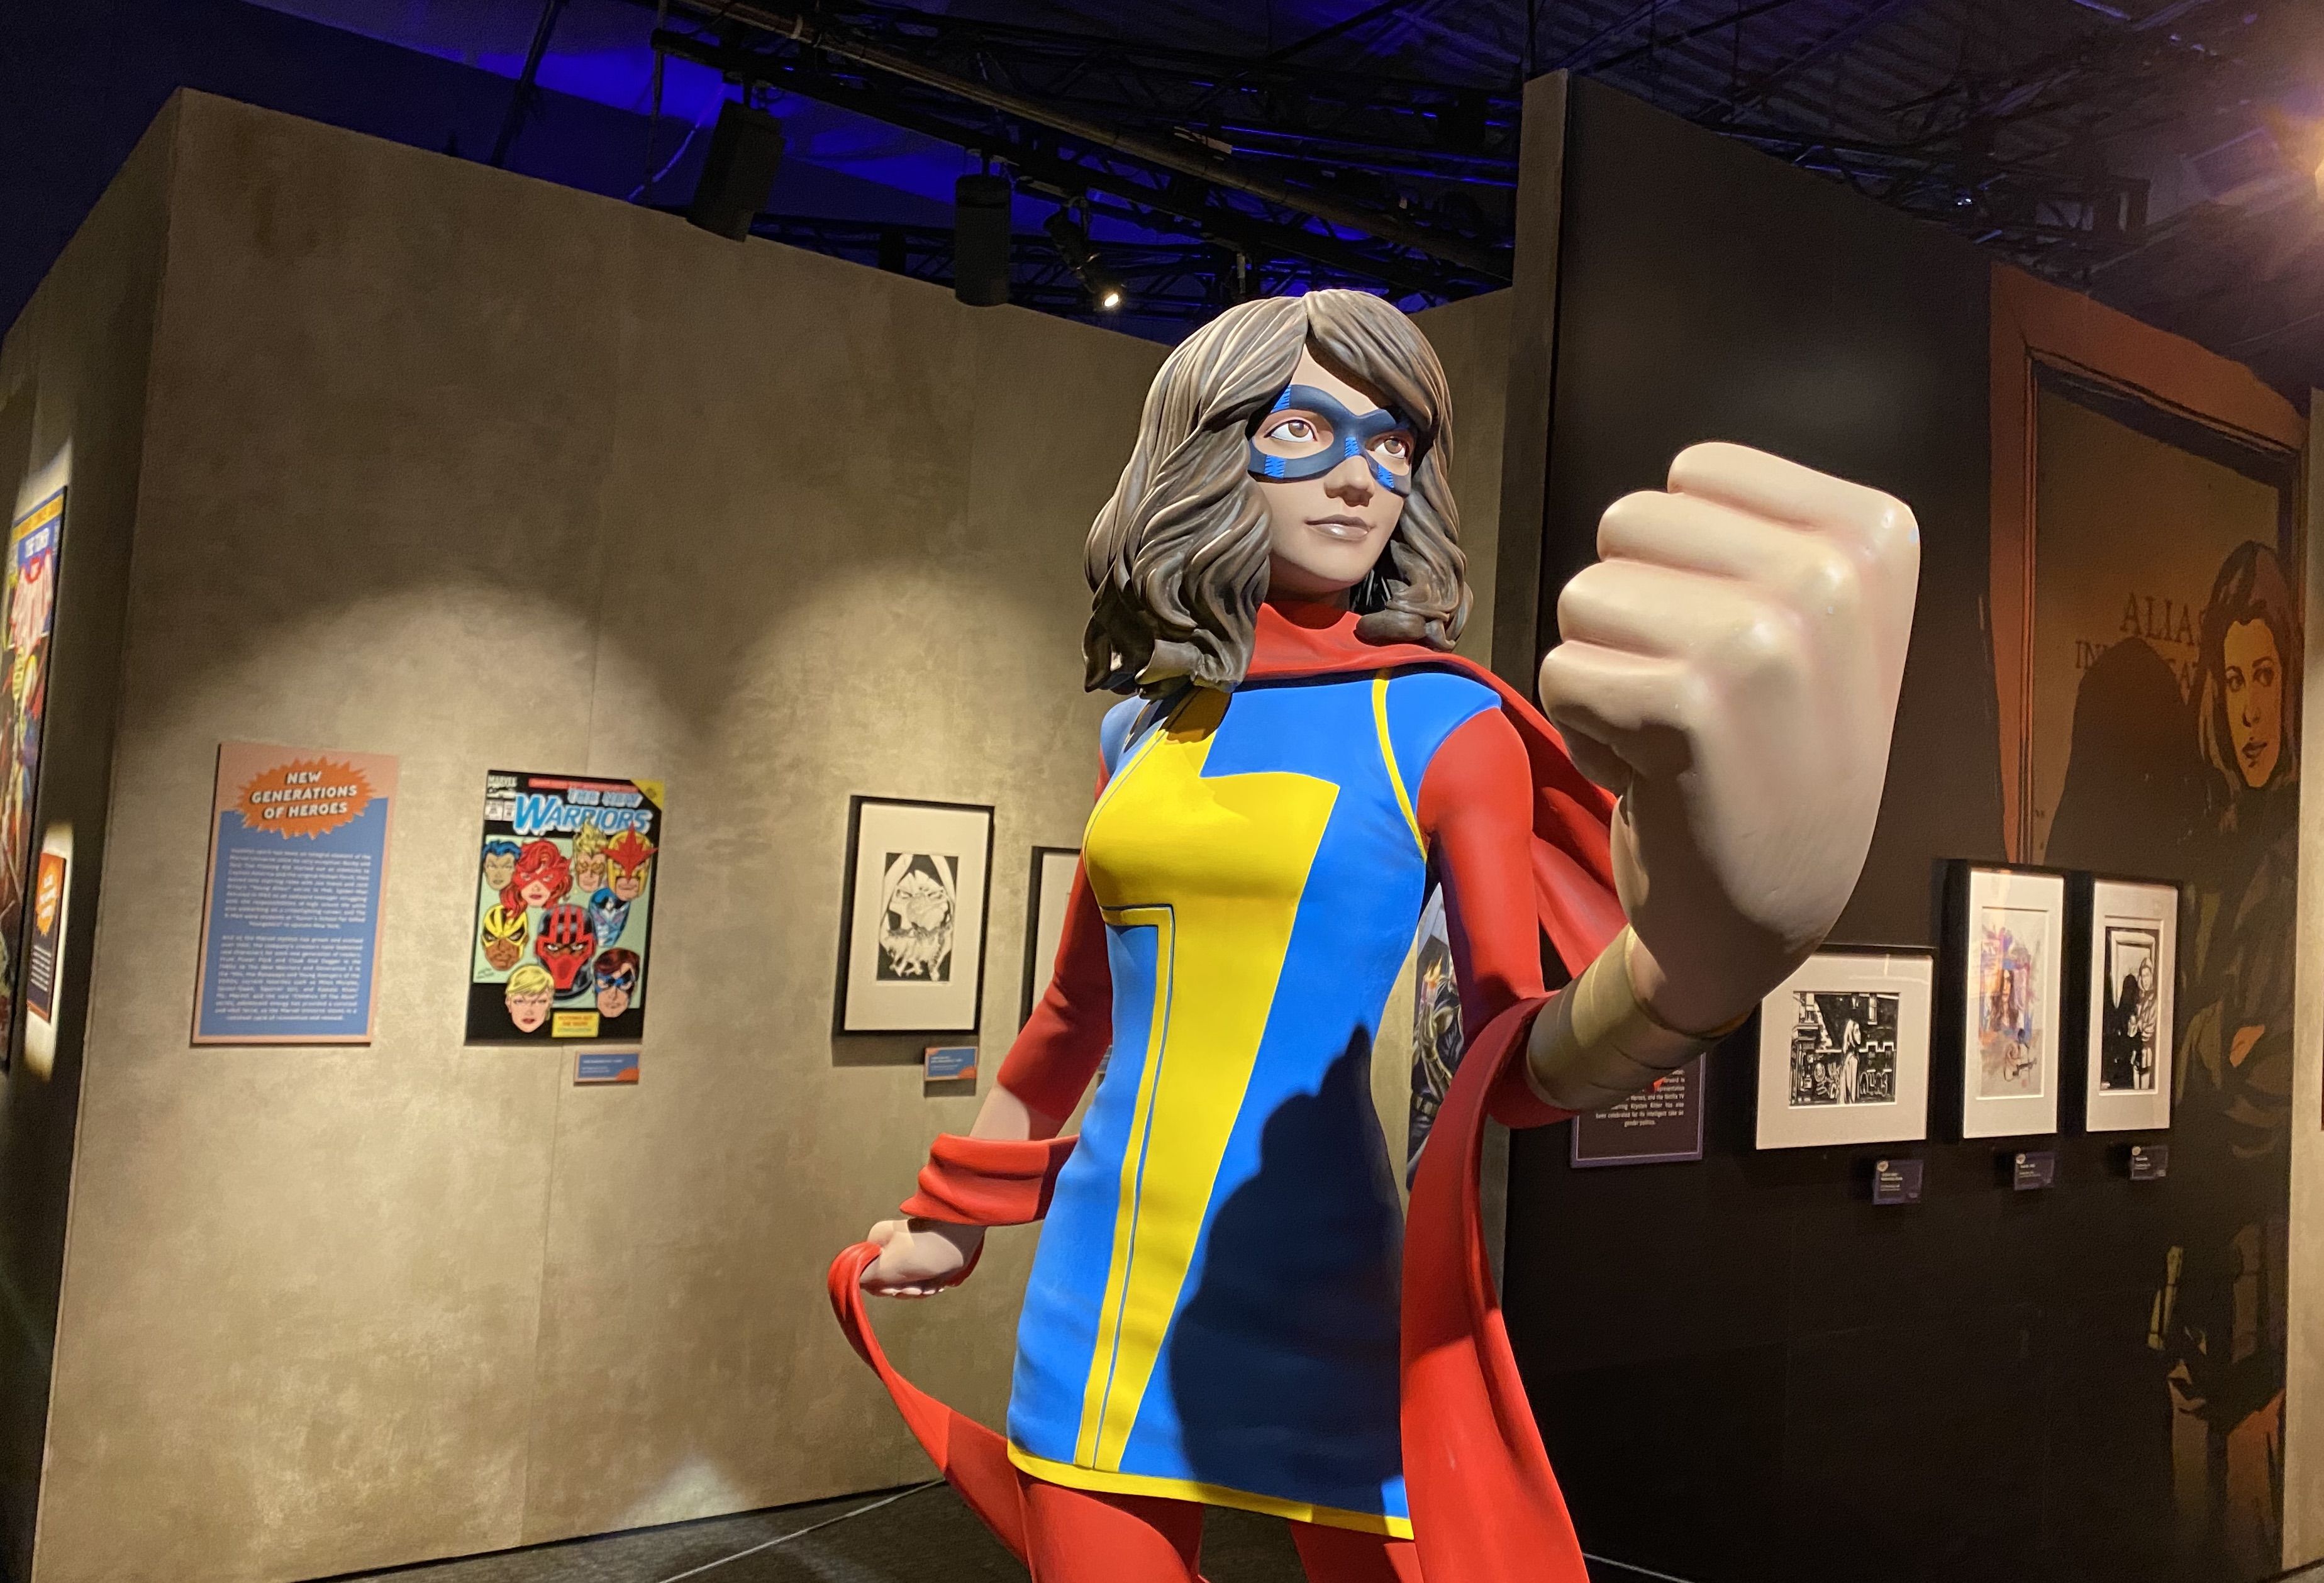 A replica of Ms. Marvel with a giant fist